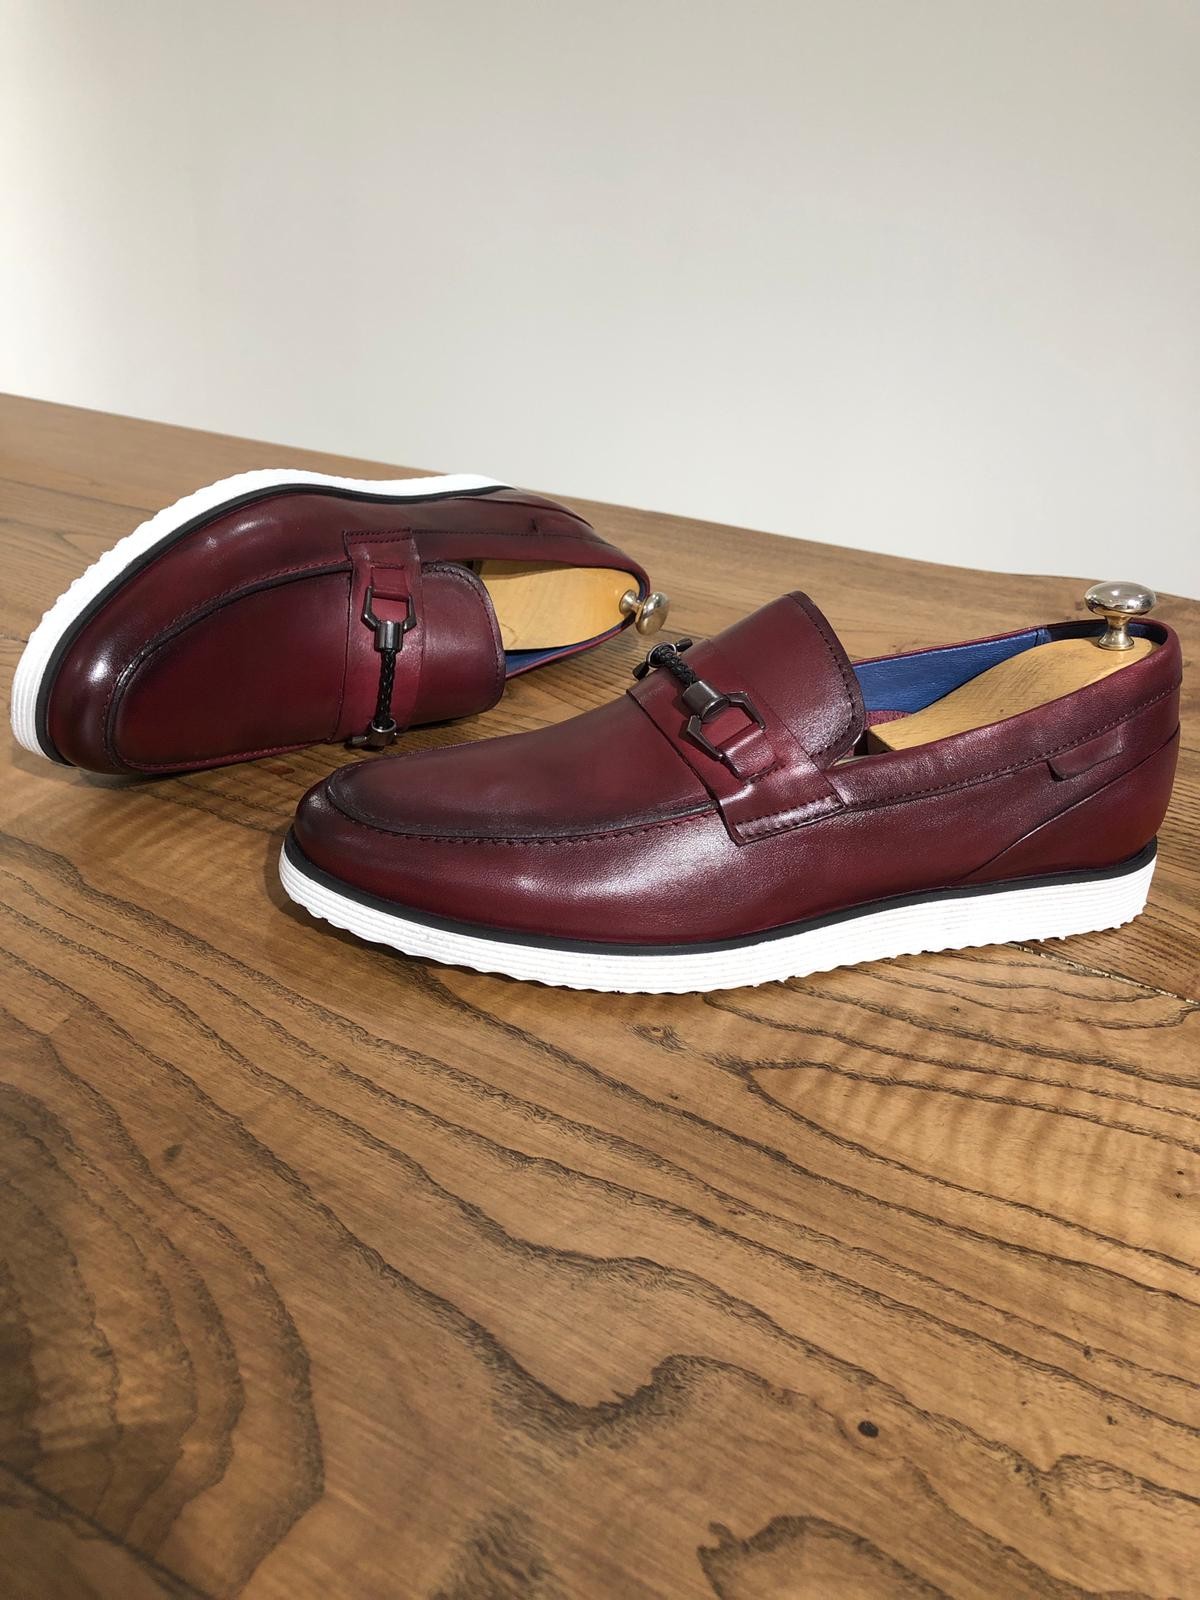 Buy Claret Red Calf Leather Loafer by Gentwith.com with Free Shipping